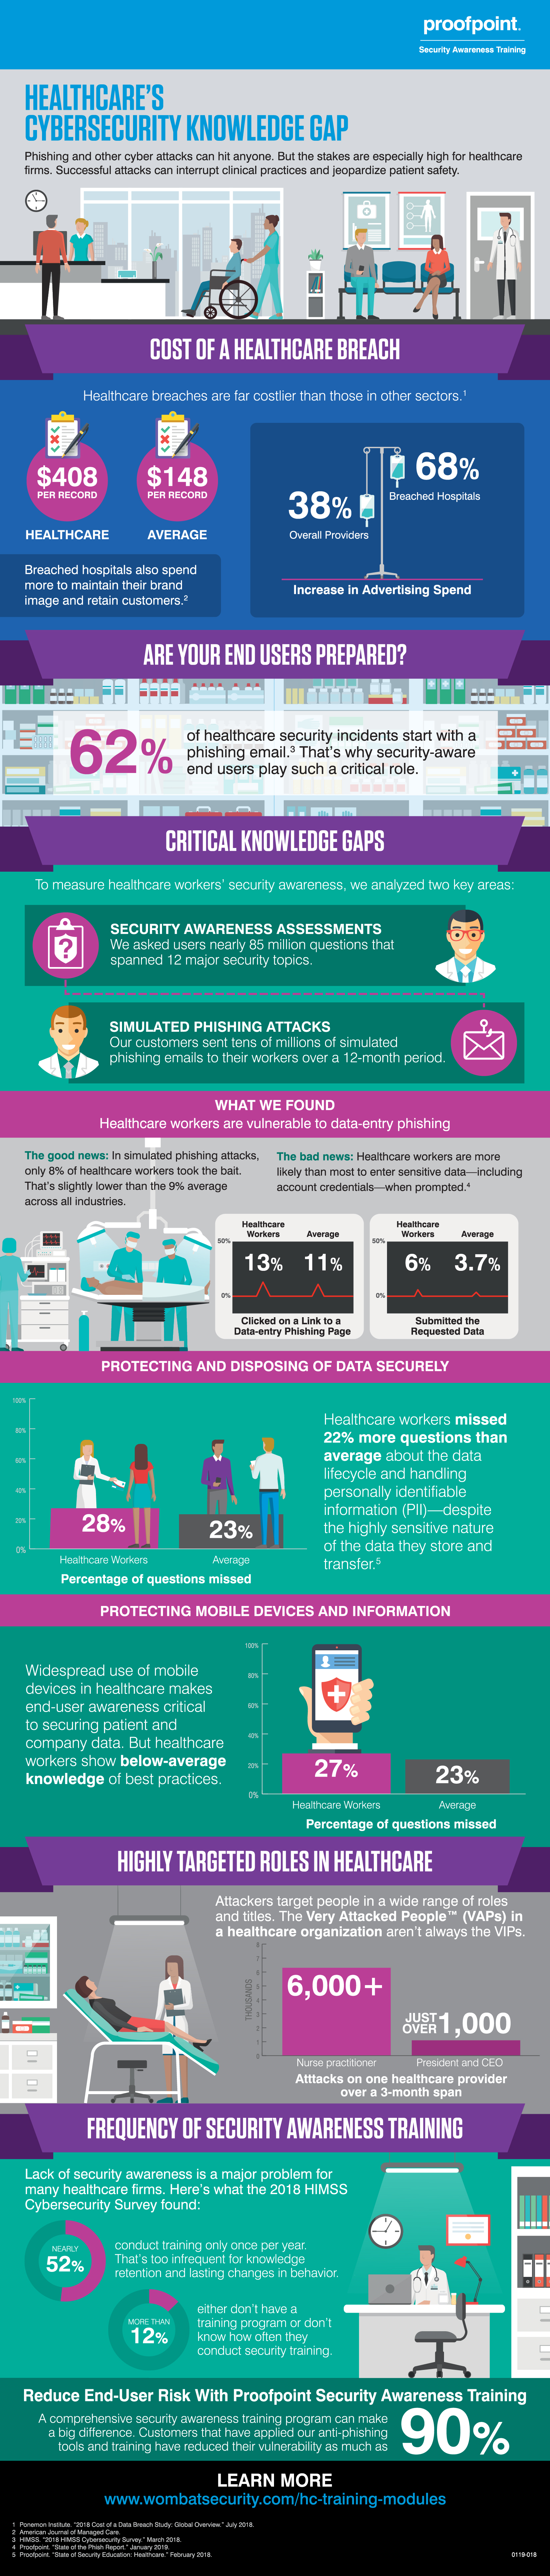 Healthcare cybersecurity knowledge gap infographic